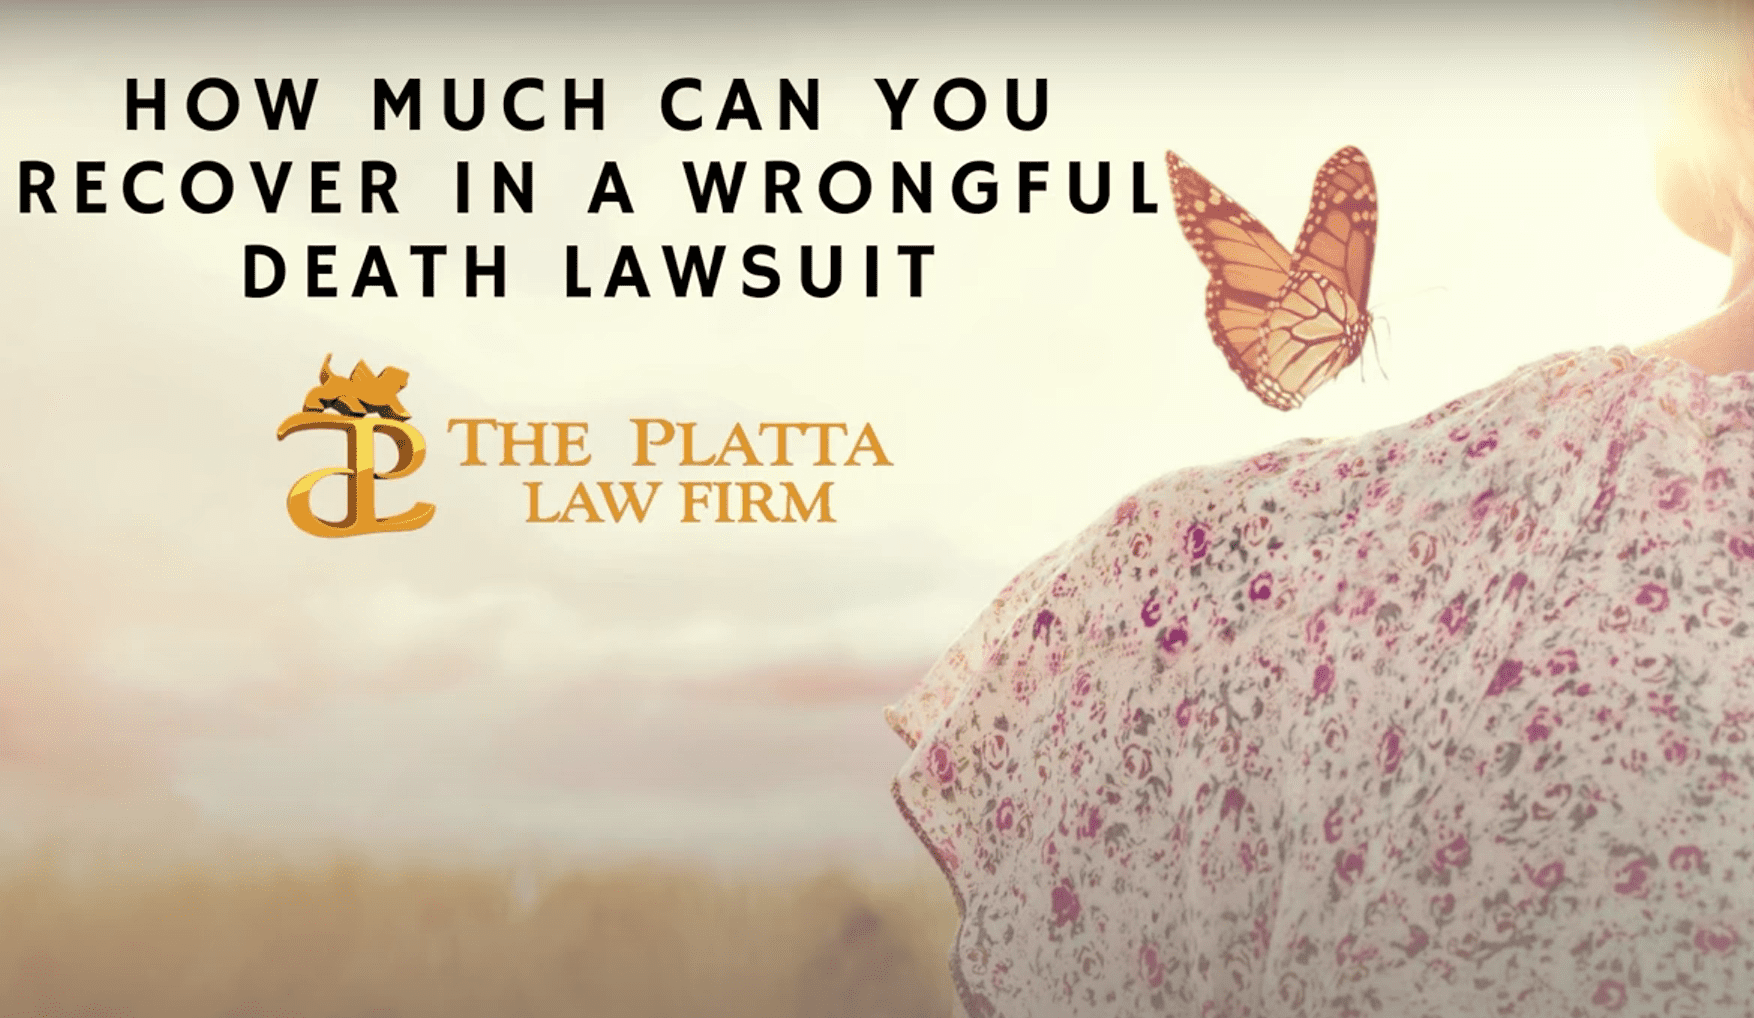 HOW MUCH CAN YOU RECOVER IN A WRONGFUL DEATH LAWSUIT Post